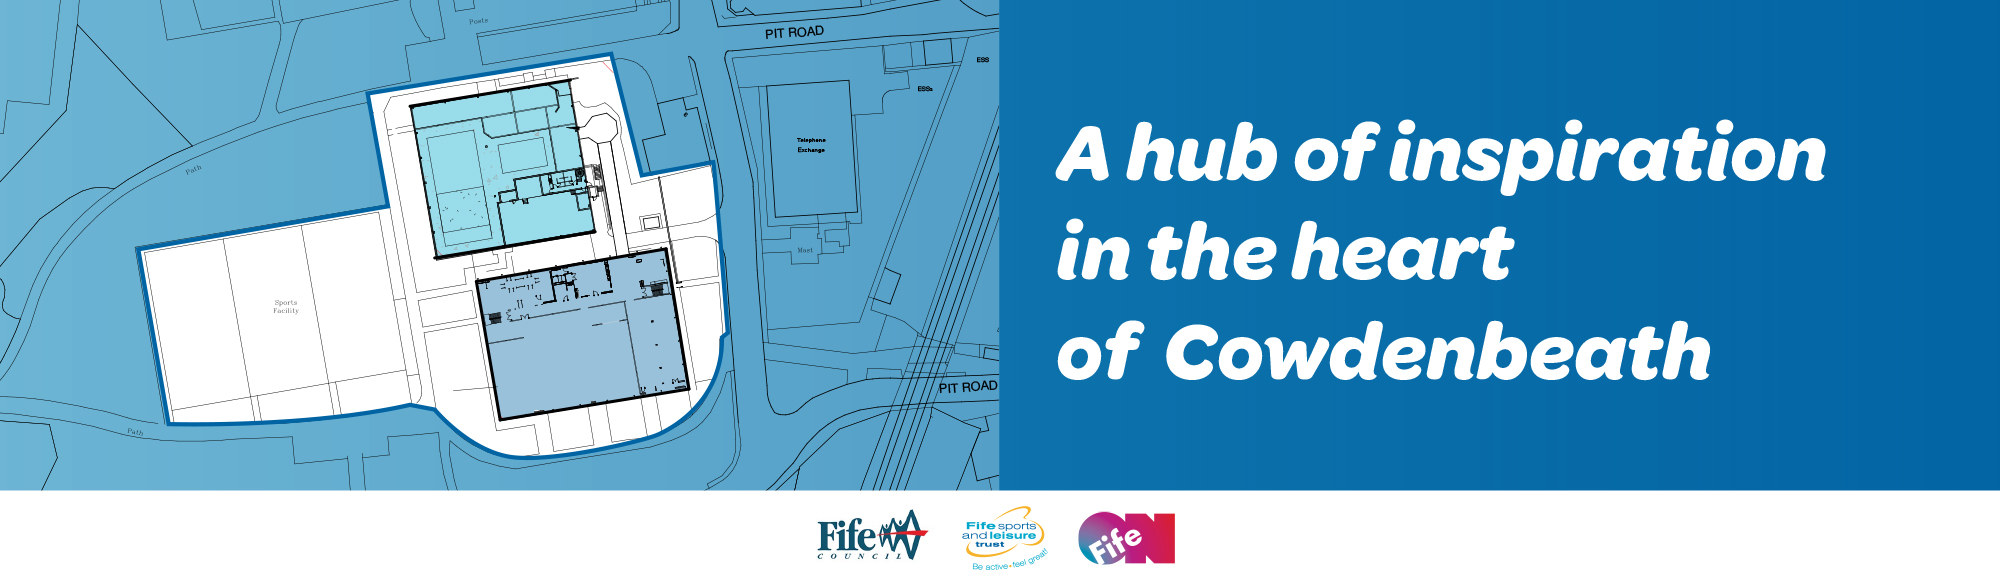 A hub of inspiration in the heart of Cowdenbeath 